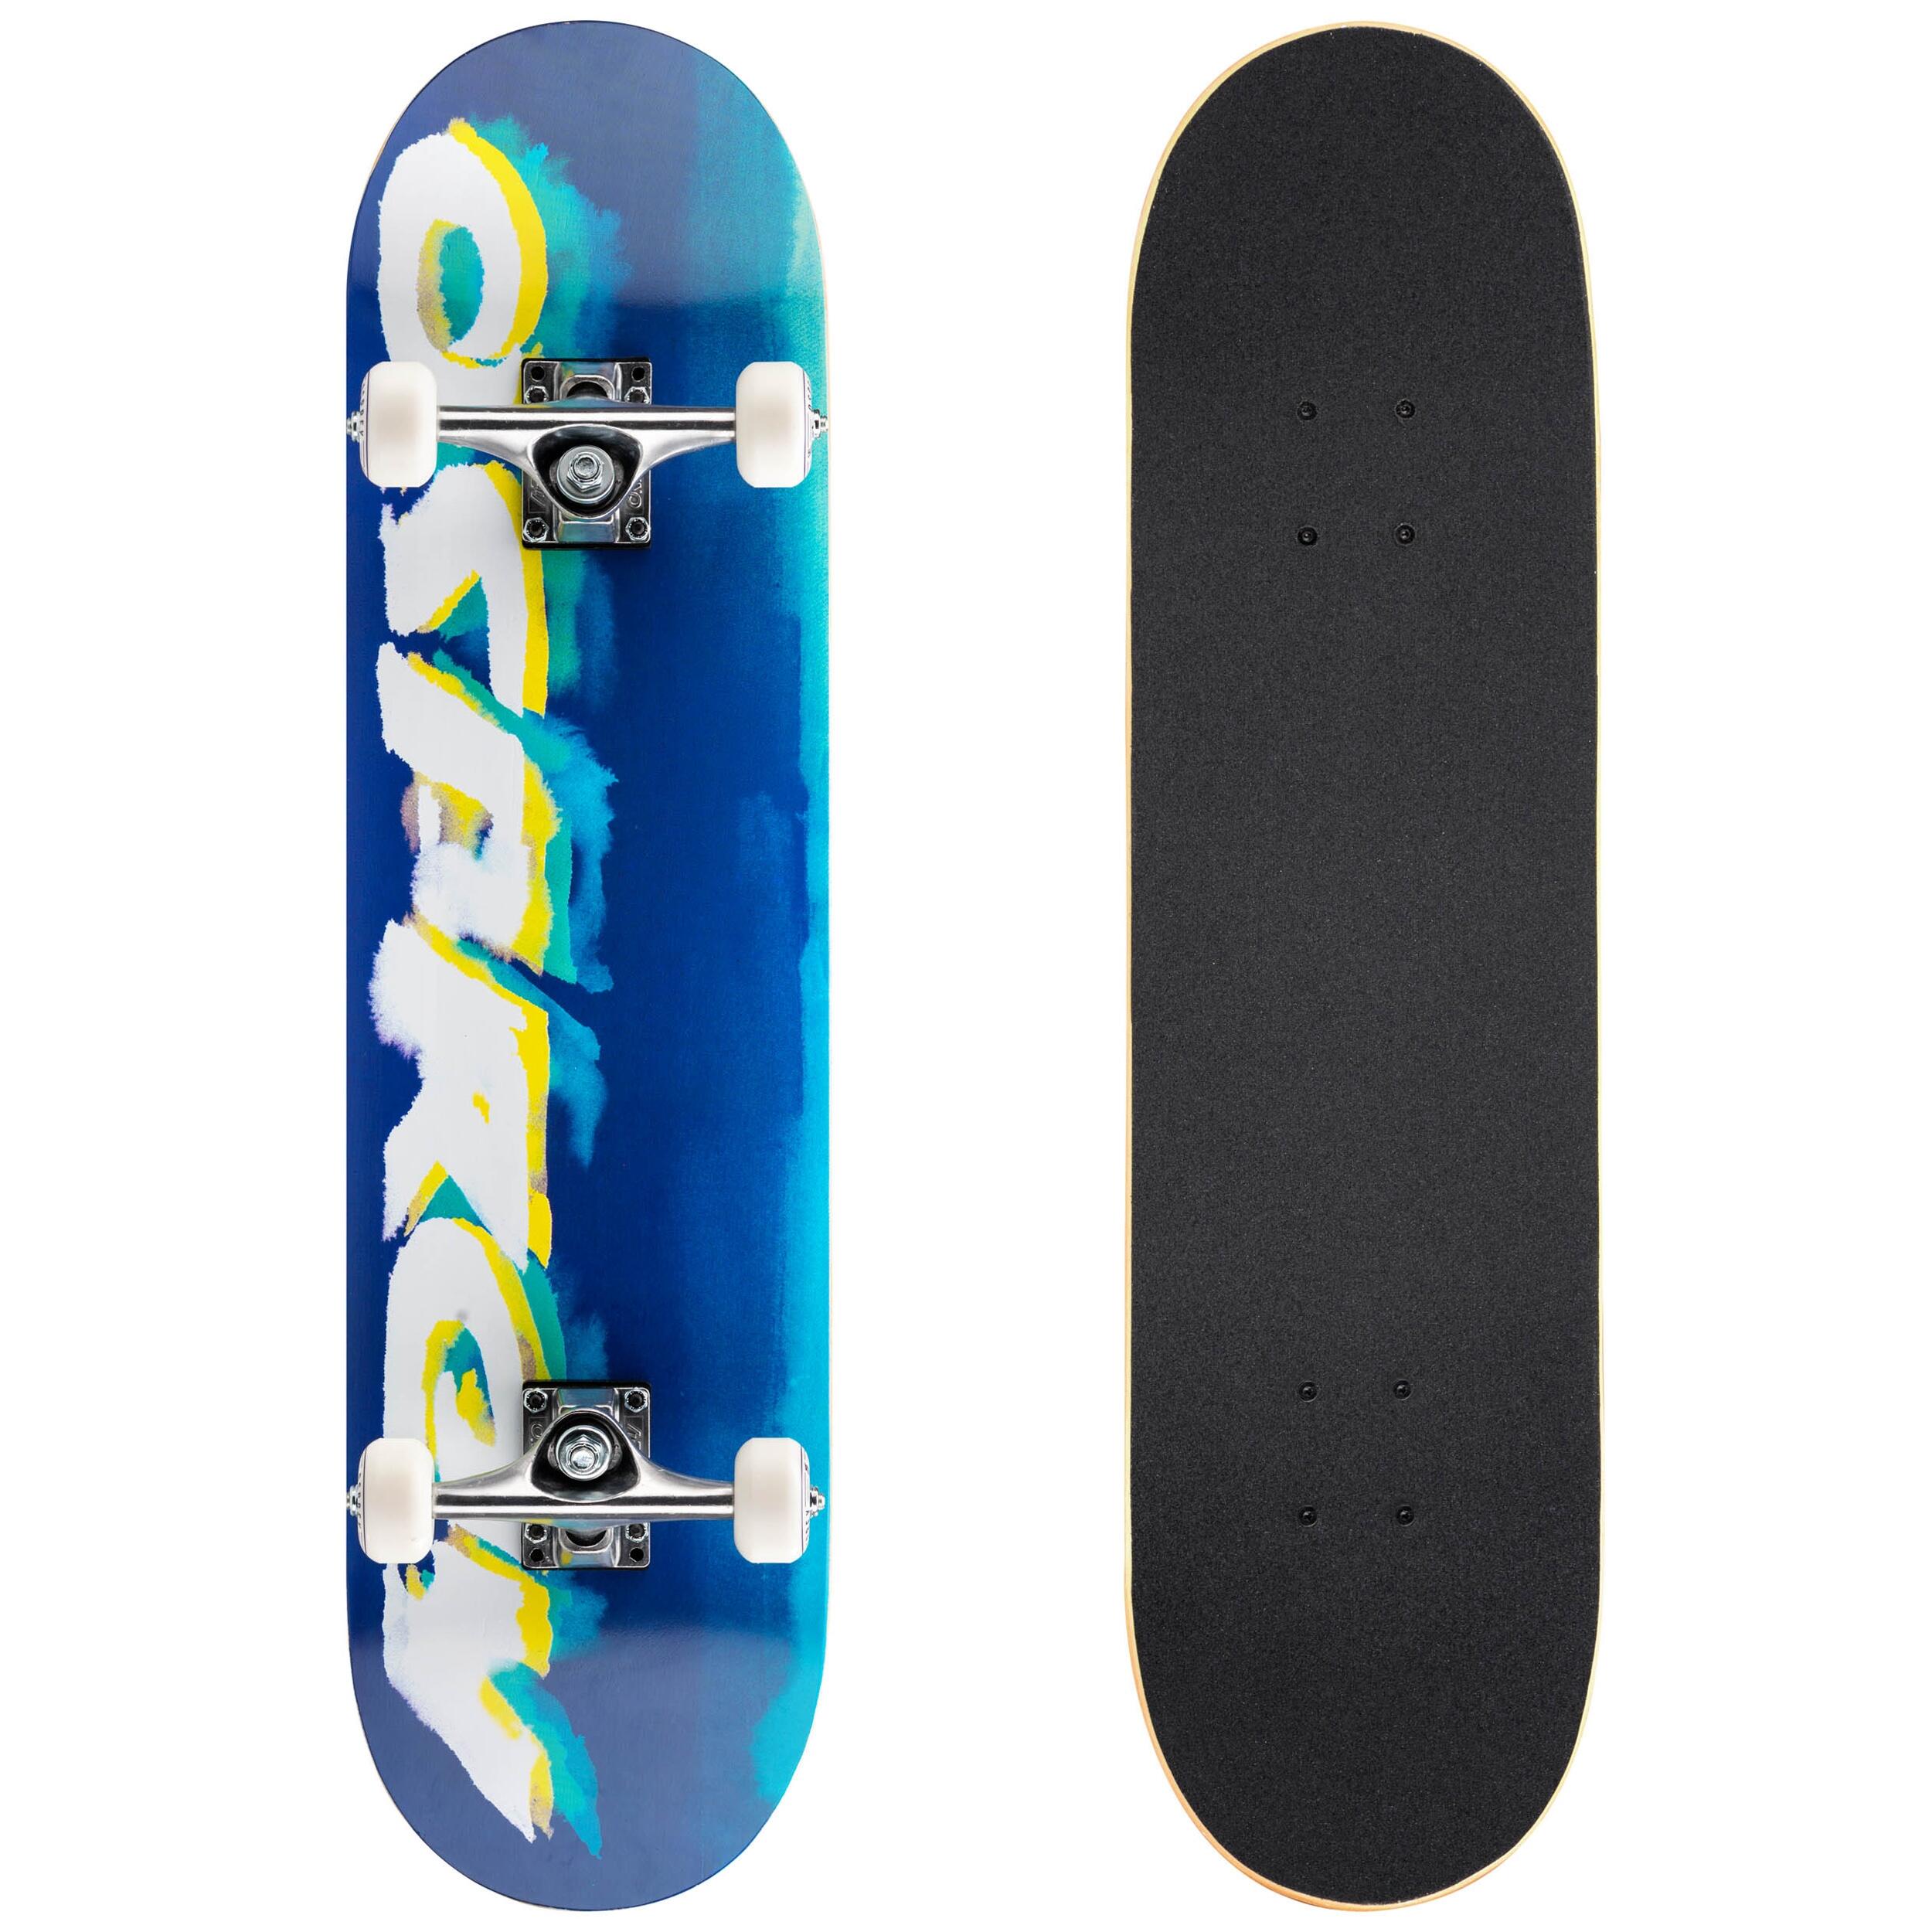 OSPREY ACTION SPORTS Osprey Complete Double Kick Skateboard, Maple Concave Deck Brush